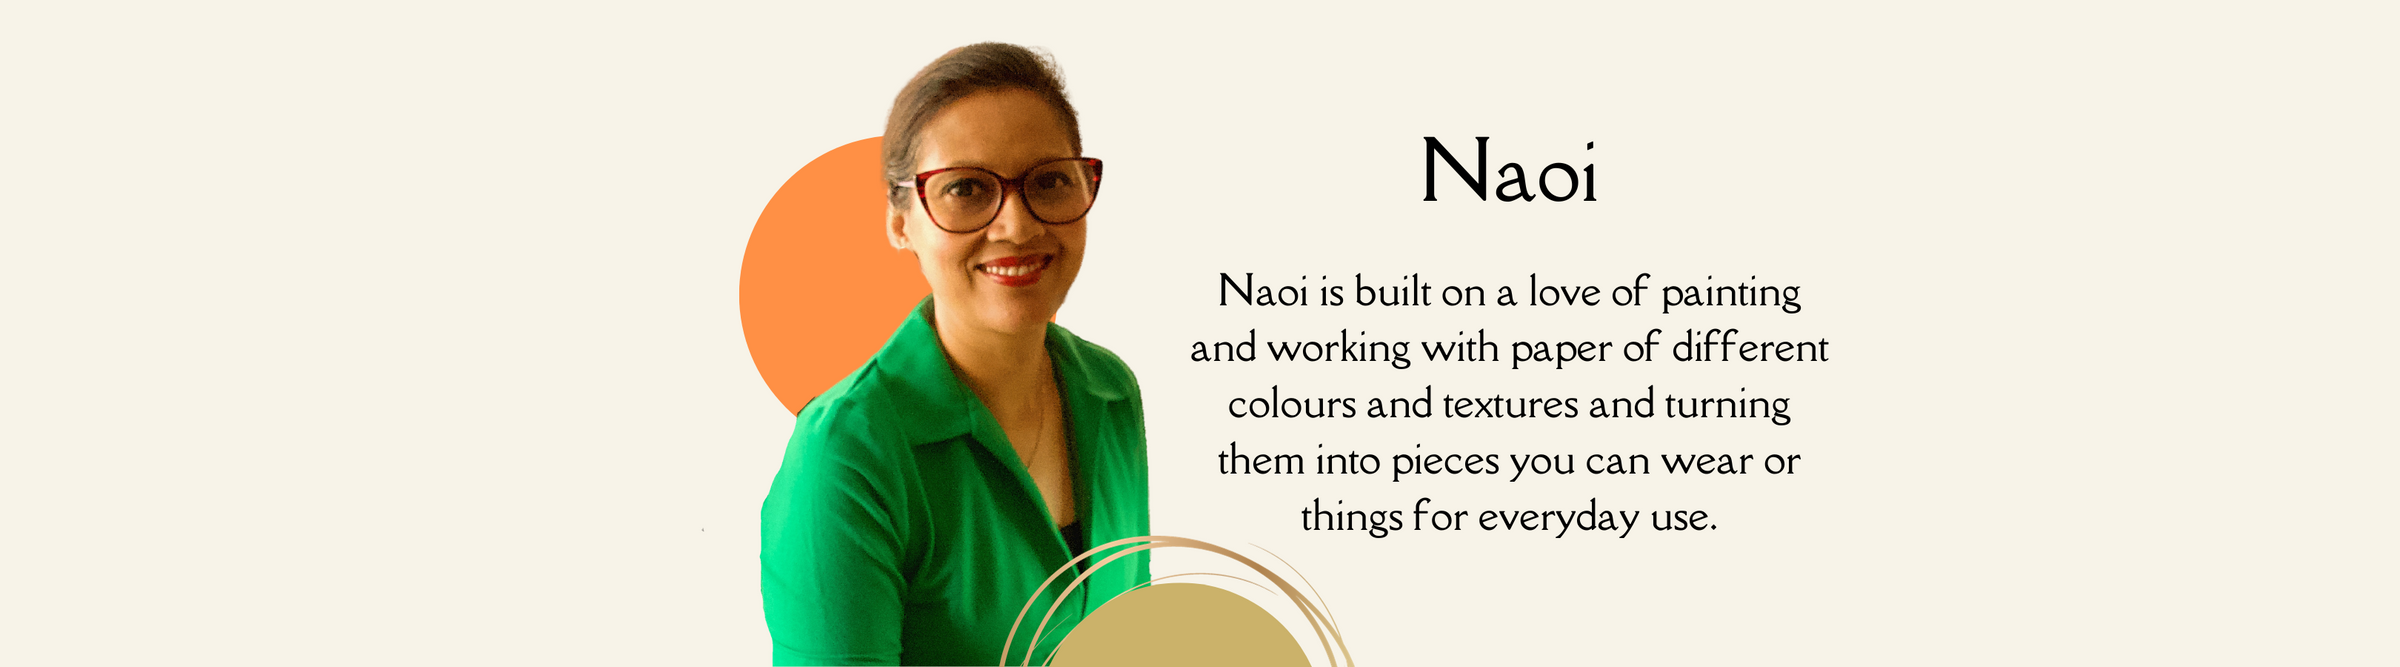 Naoi is built on a love of painting and working with paper of different colours and textures and turning them into pieces you can wear or things for everyday use.